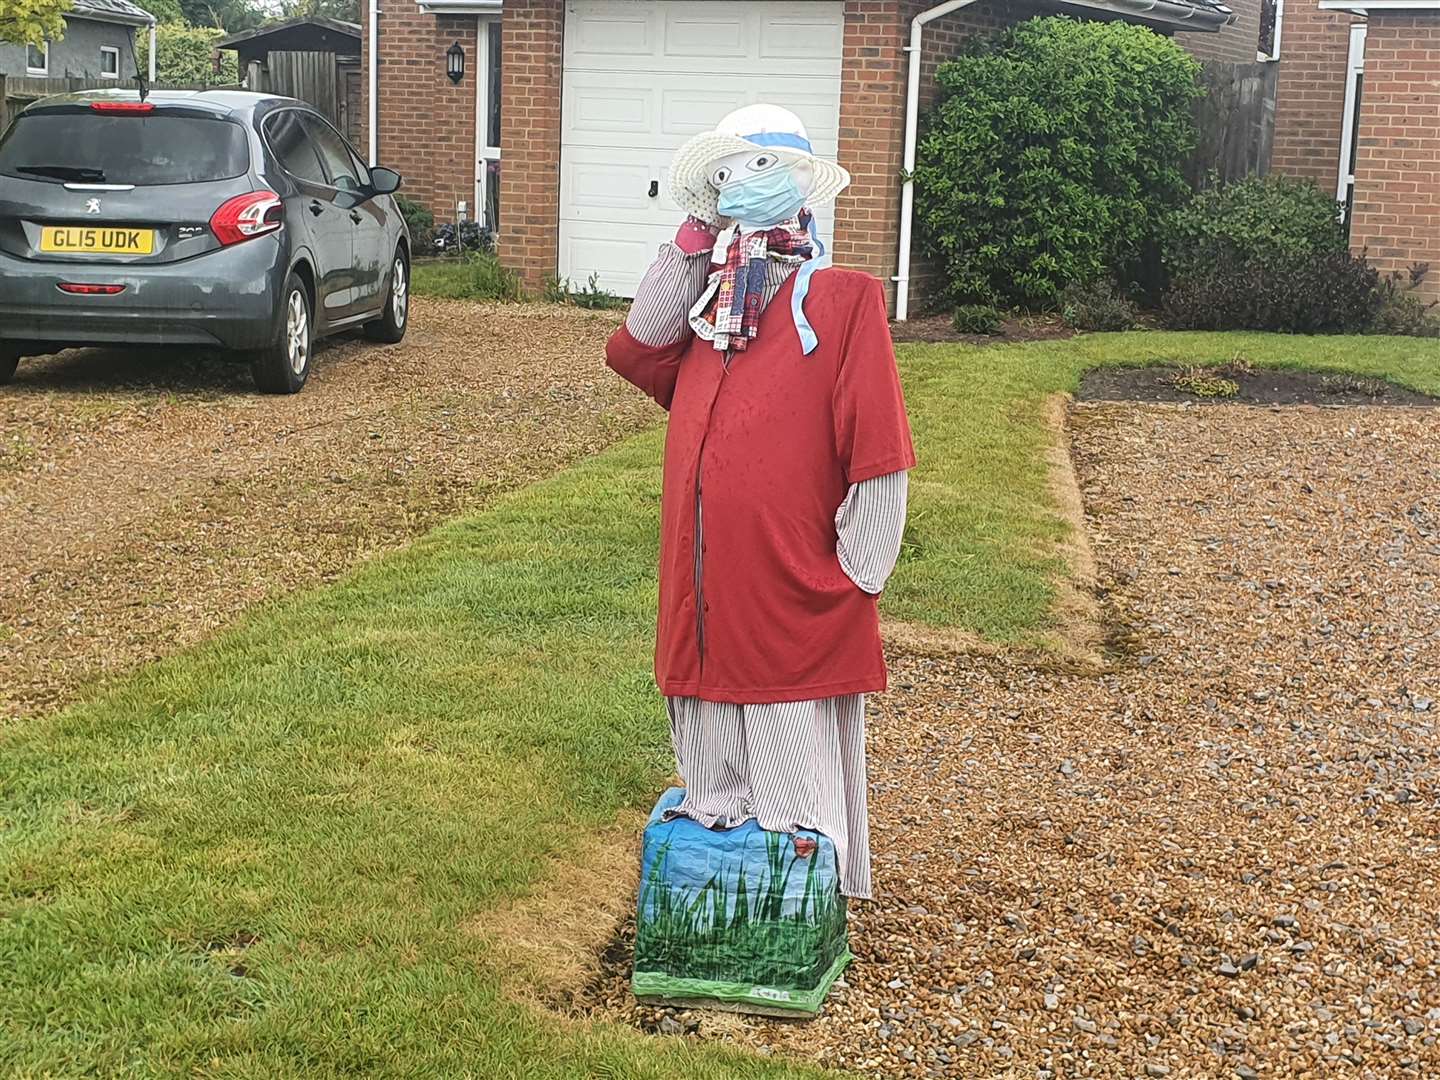 One of the many scarecrows currently adorning gardens in West Hythe